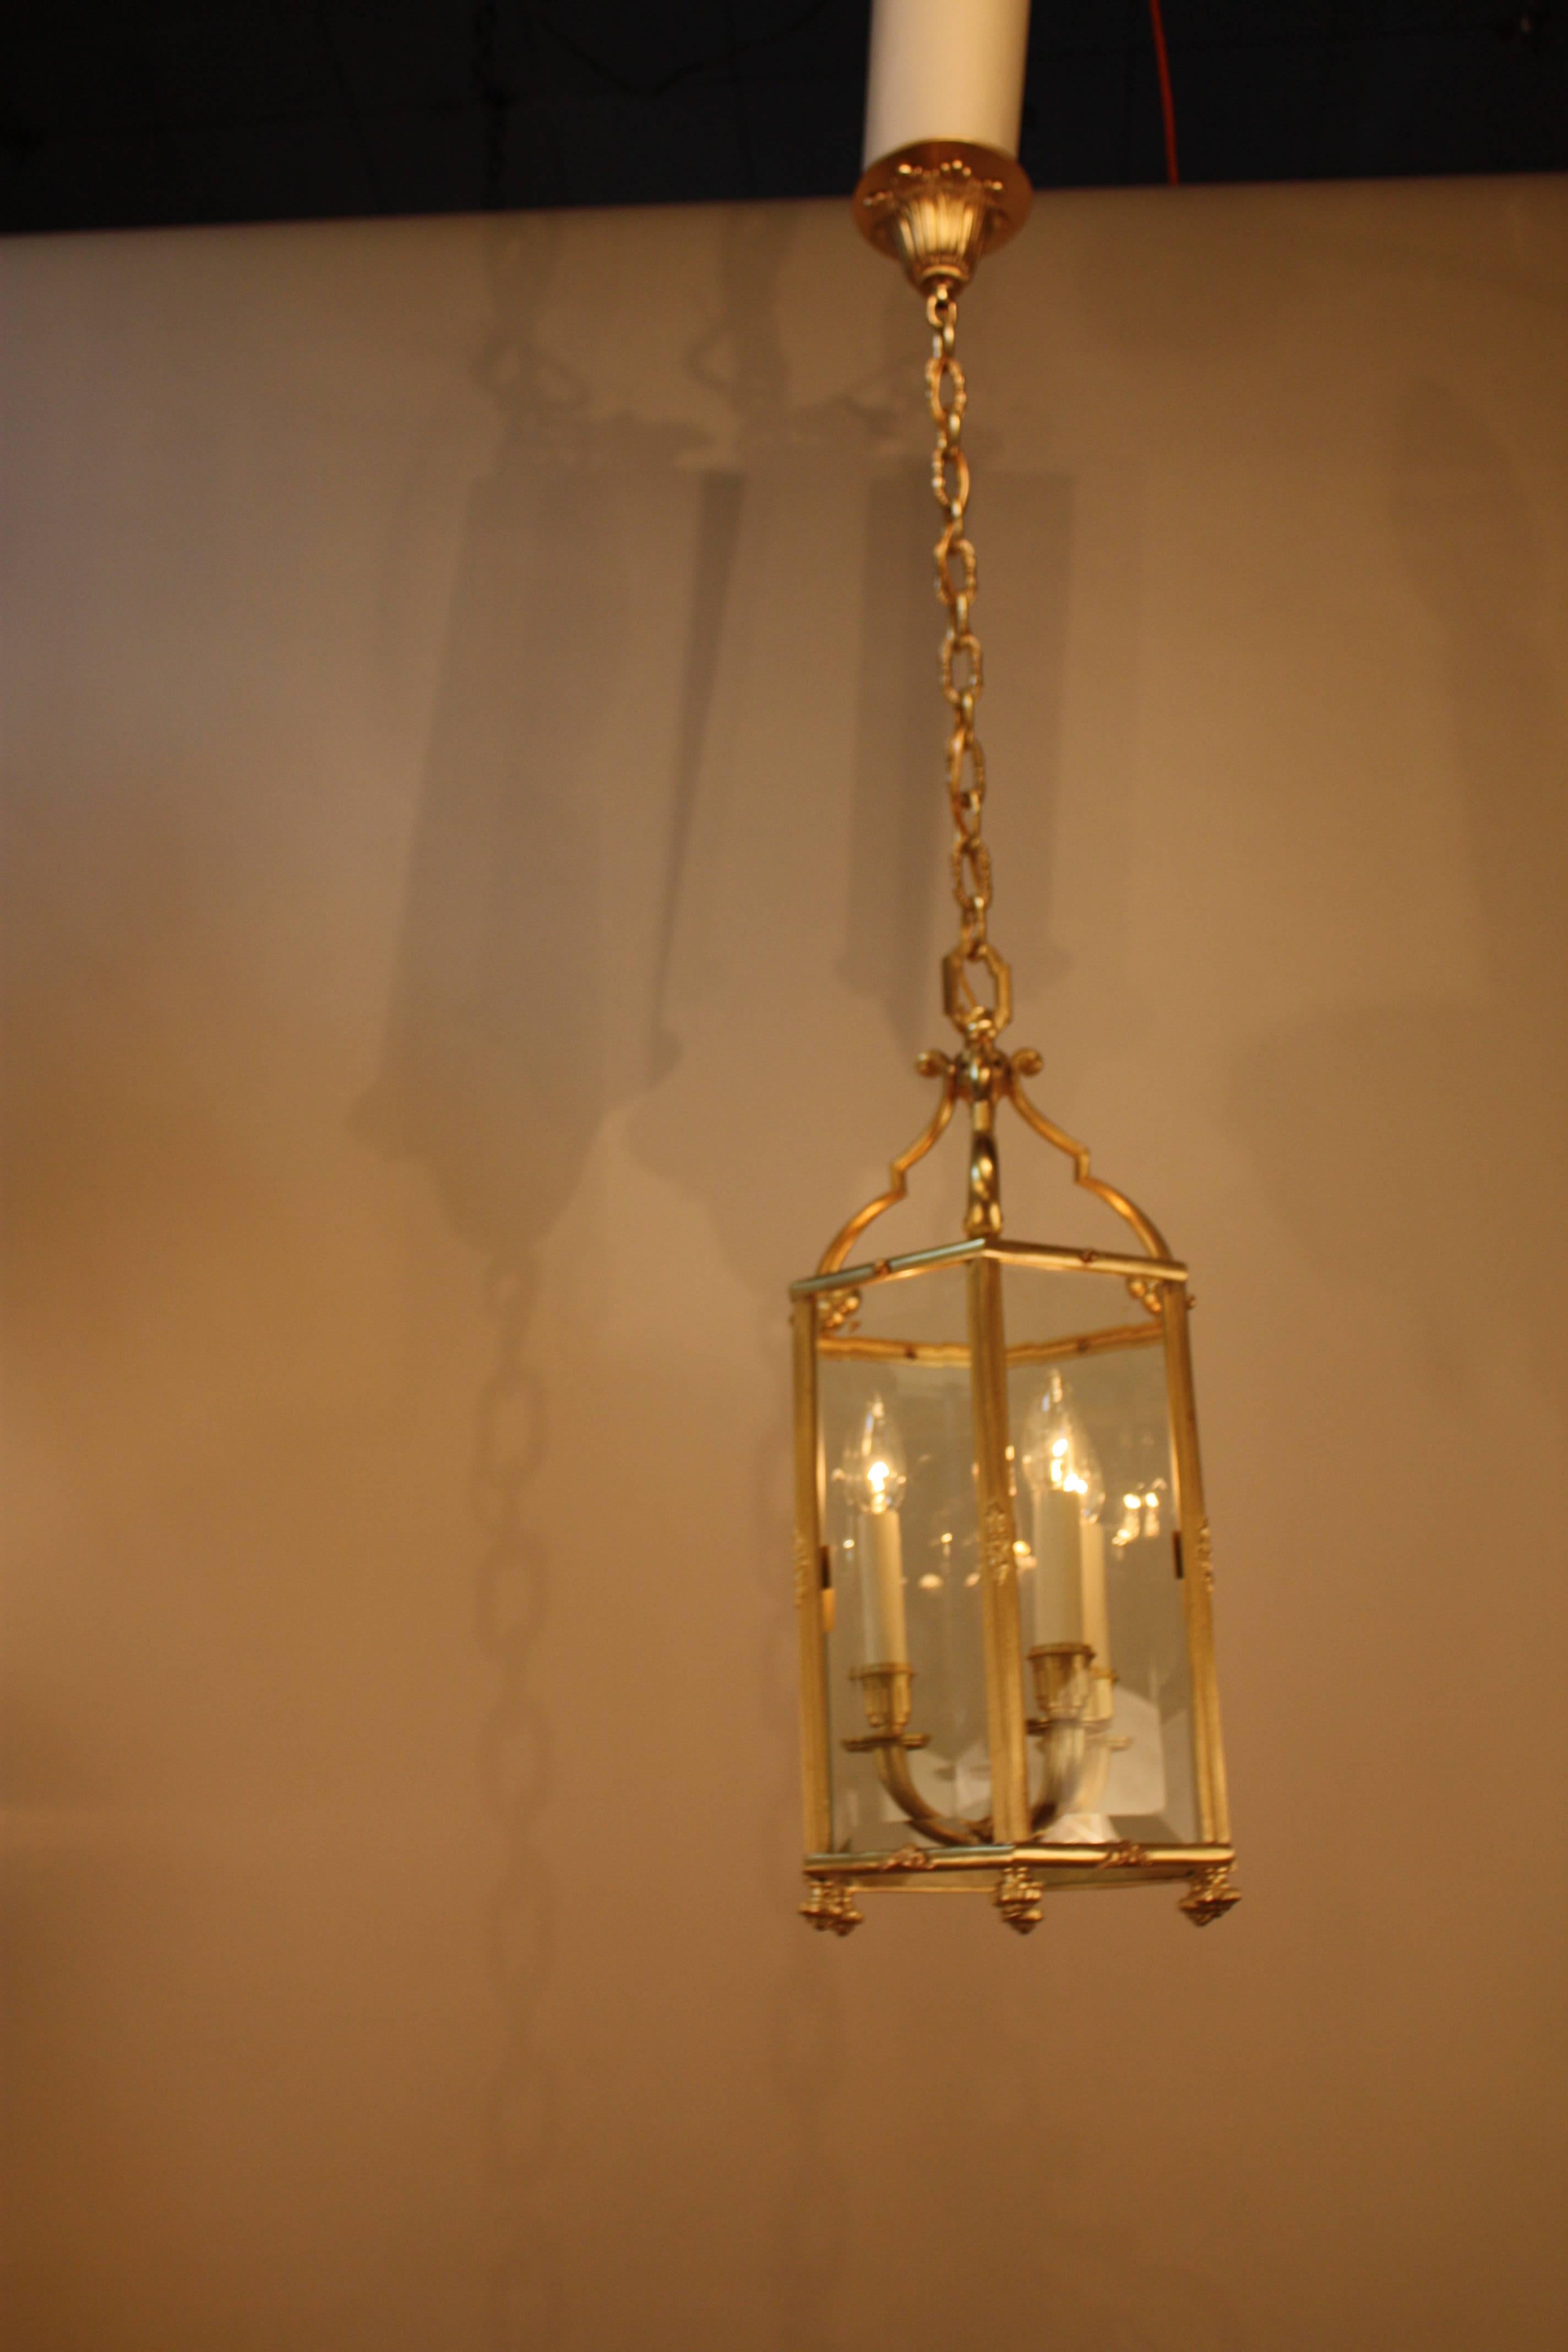 Made in France during the 1930s, this bronze hexagon shape beveled glass lantern is exceptionally beautiful. Three candelabra style lights elegantly illuminate and an absolutely superb fixture.